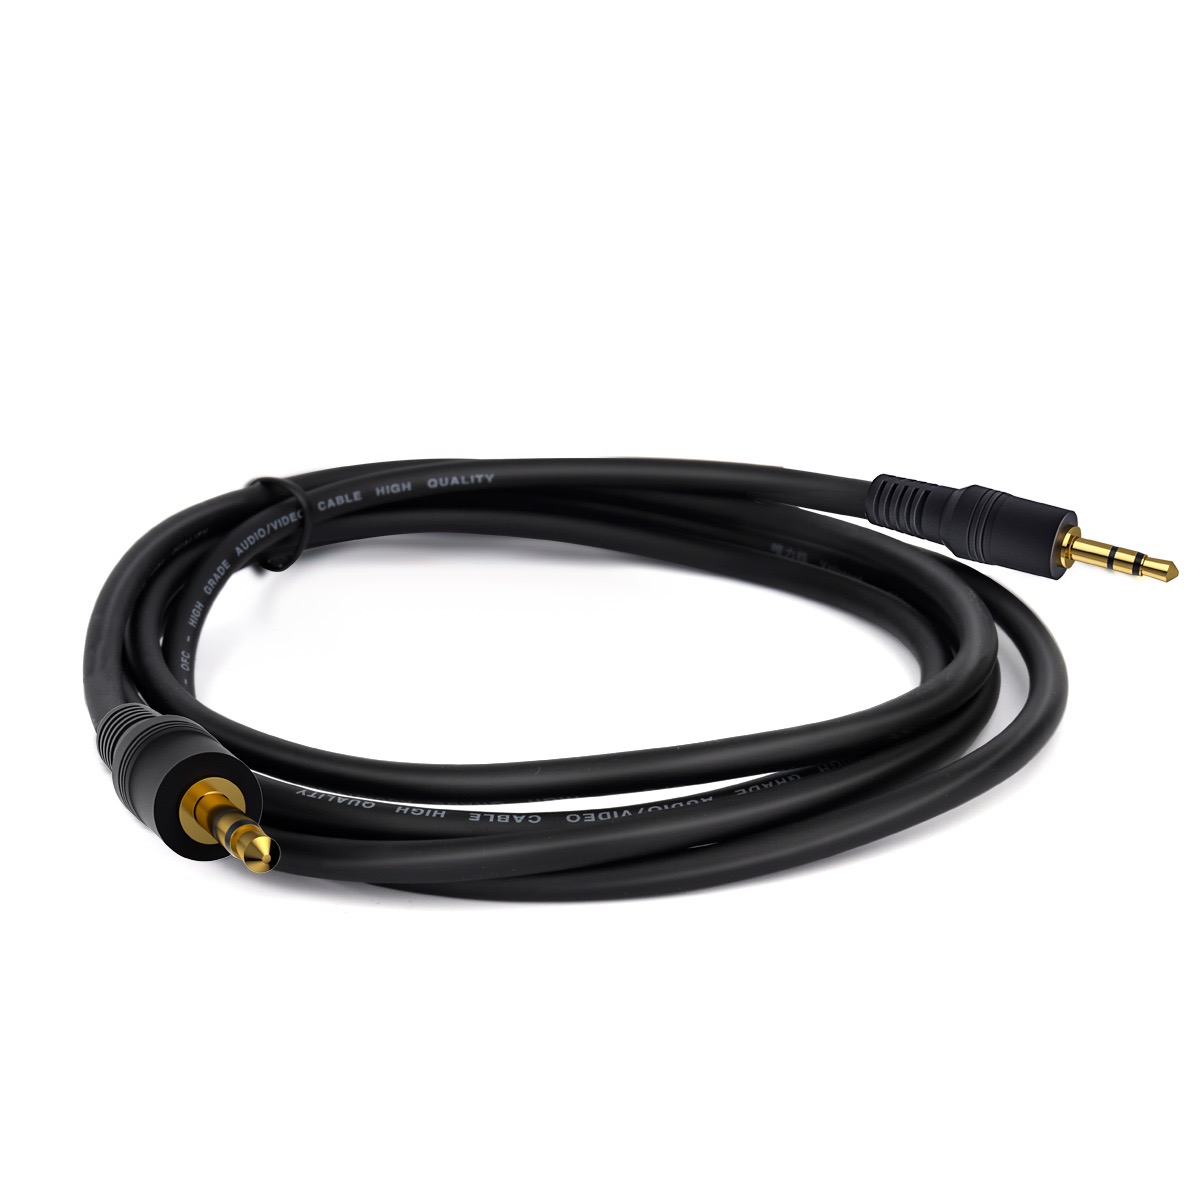 3.5mm Audio Cable Male to Male Car Stereo AUX Extension Cable for Phone MP3 MP4